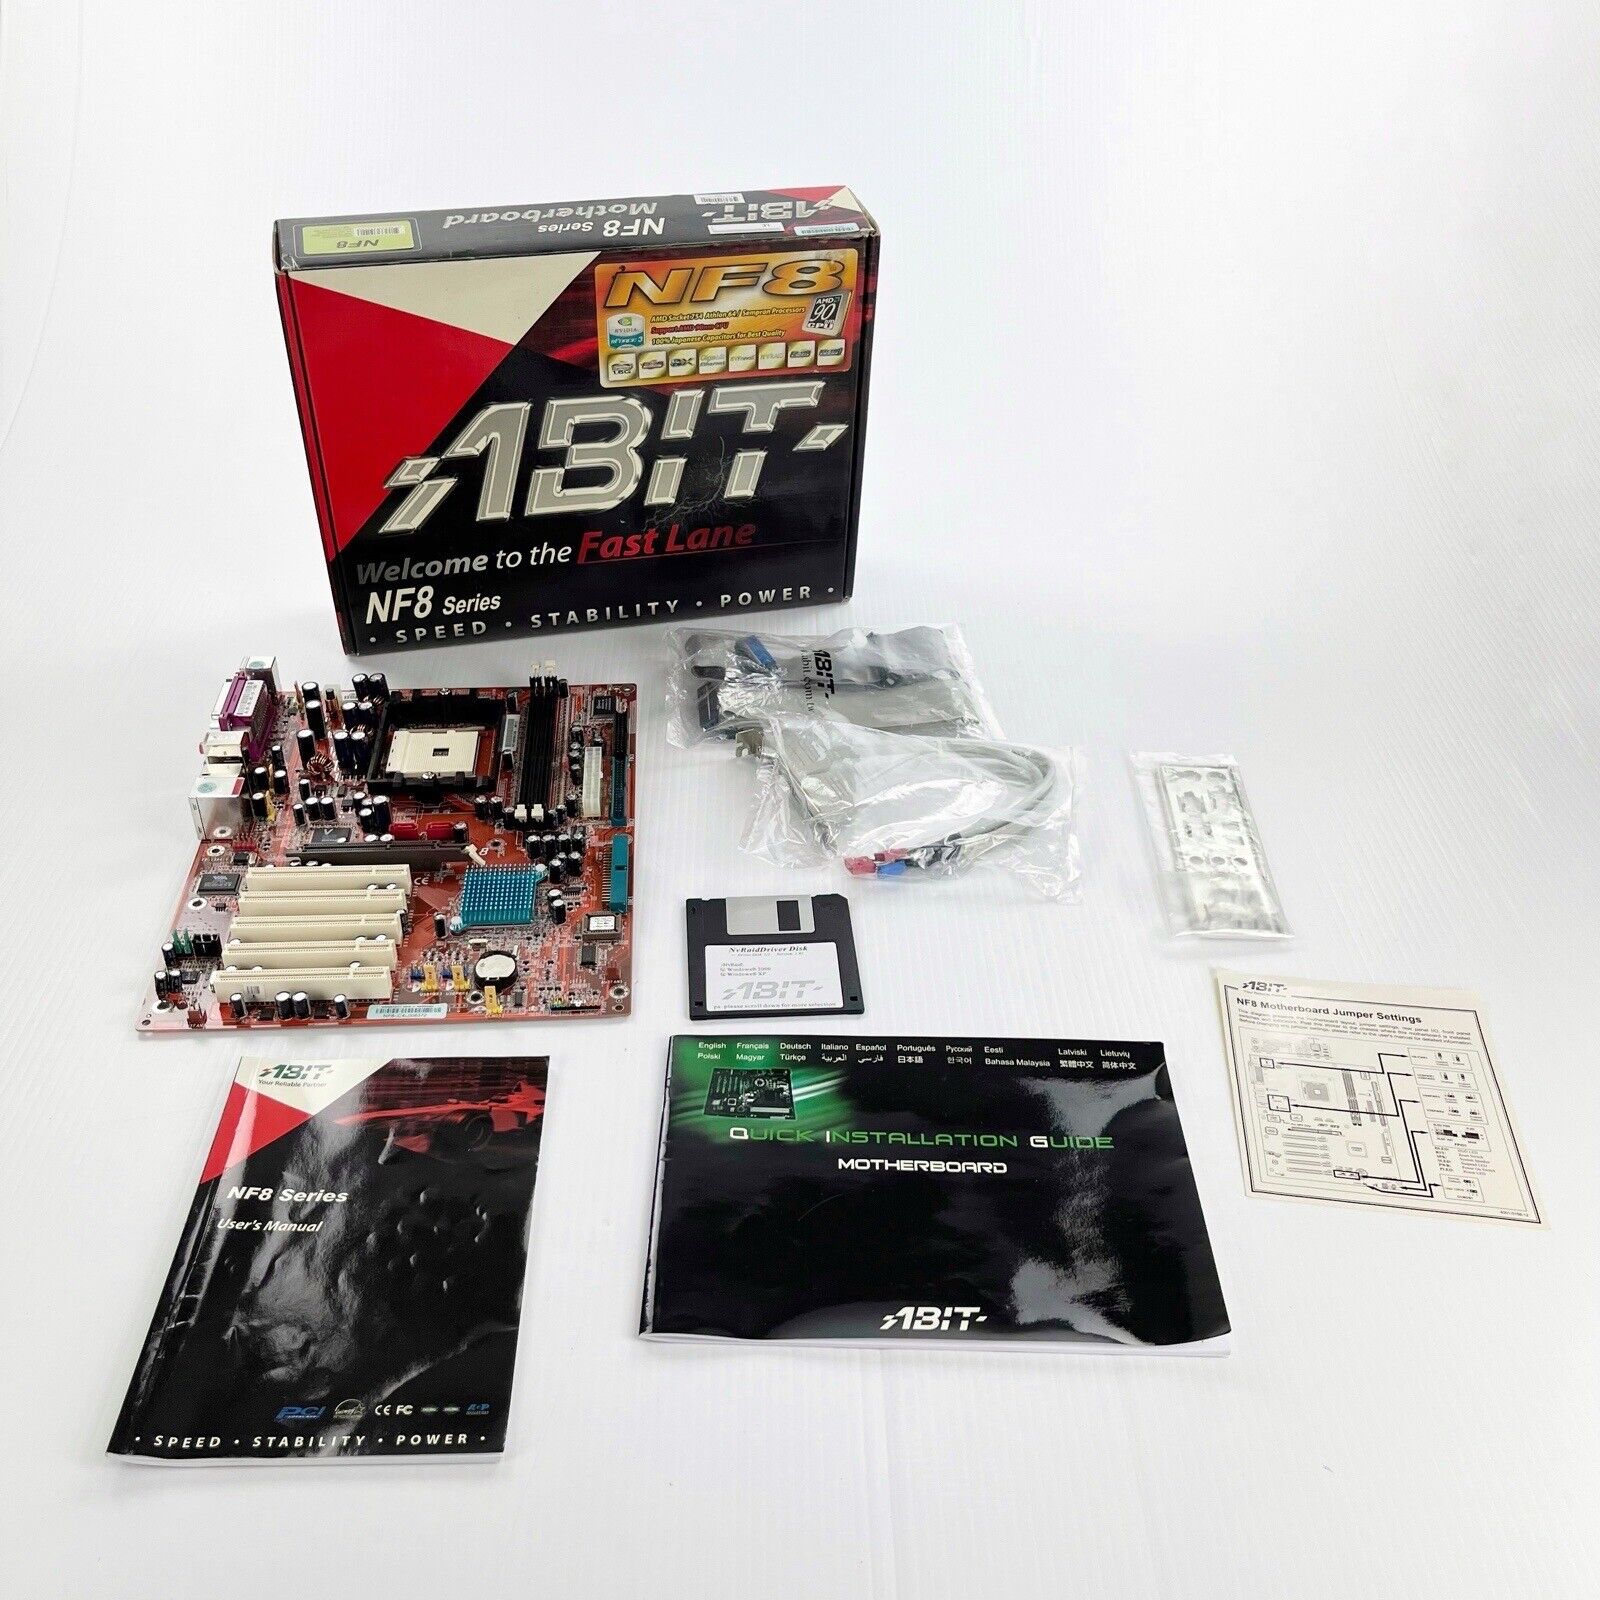 Abit NF8 Series AMD Socket 754 Athlon 64 Computer Motherboard with Box AS IS